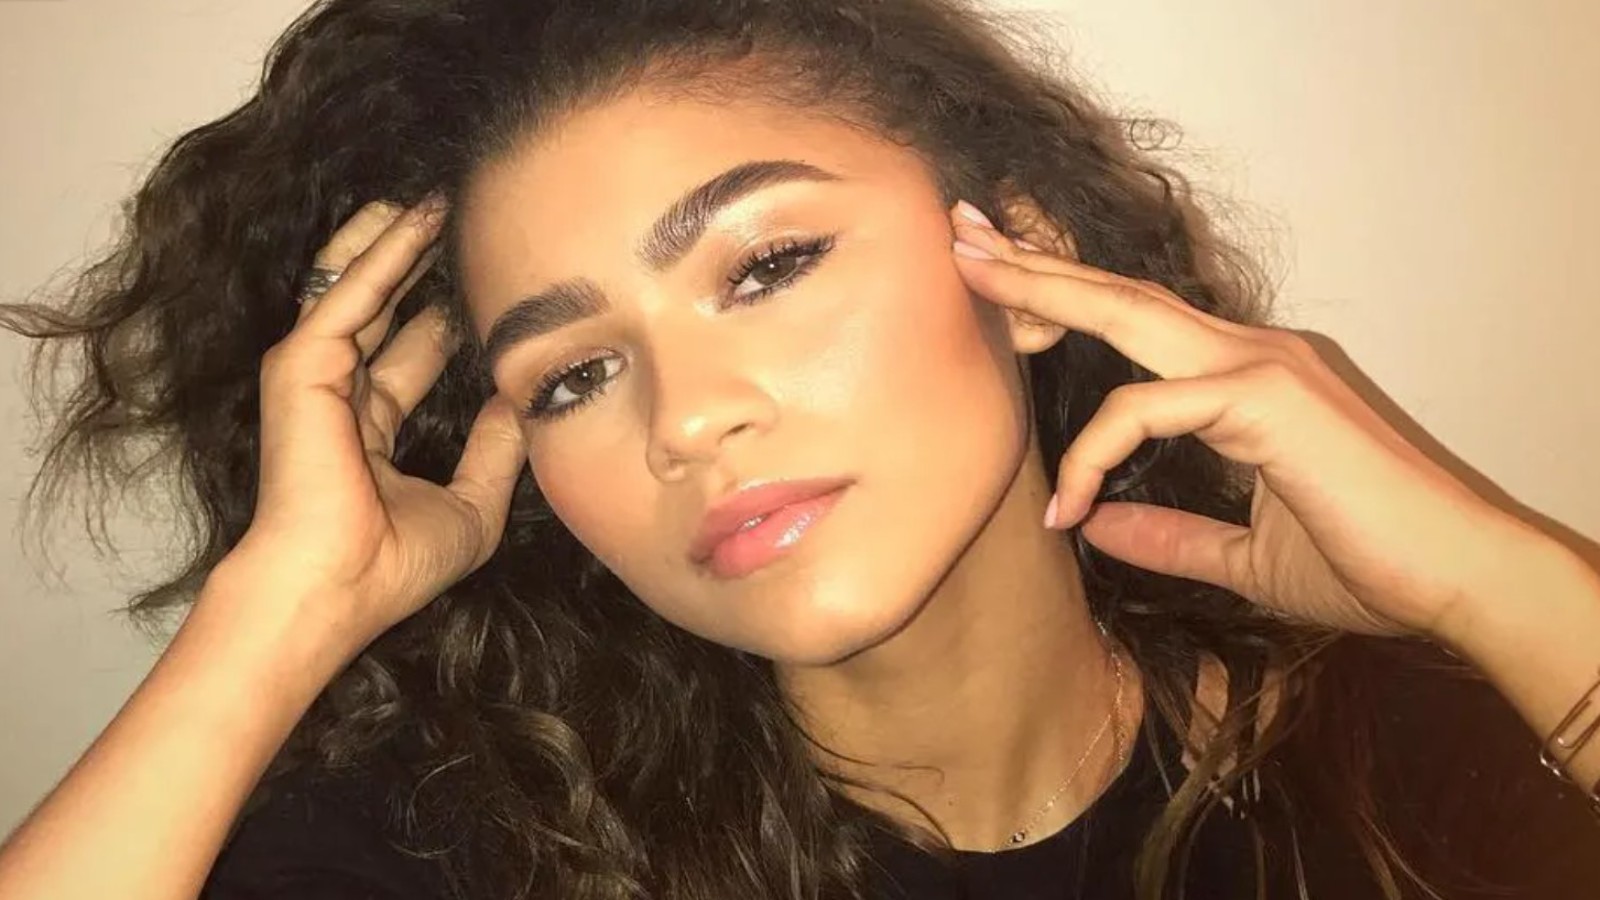 Zendaya Just Debuted A New '90s-Inspired Haircut For Fall